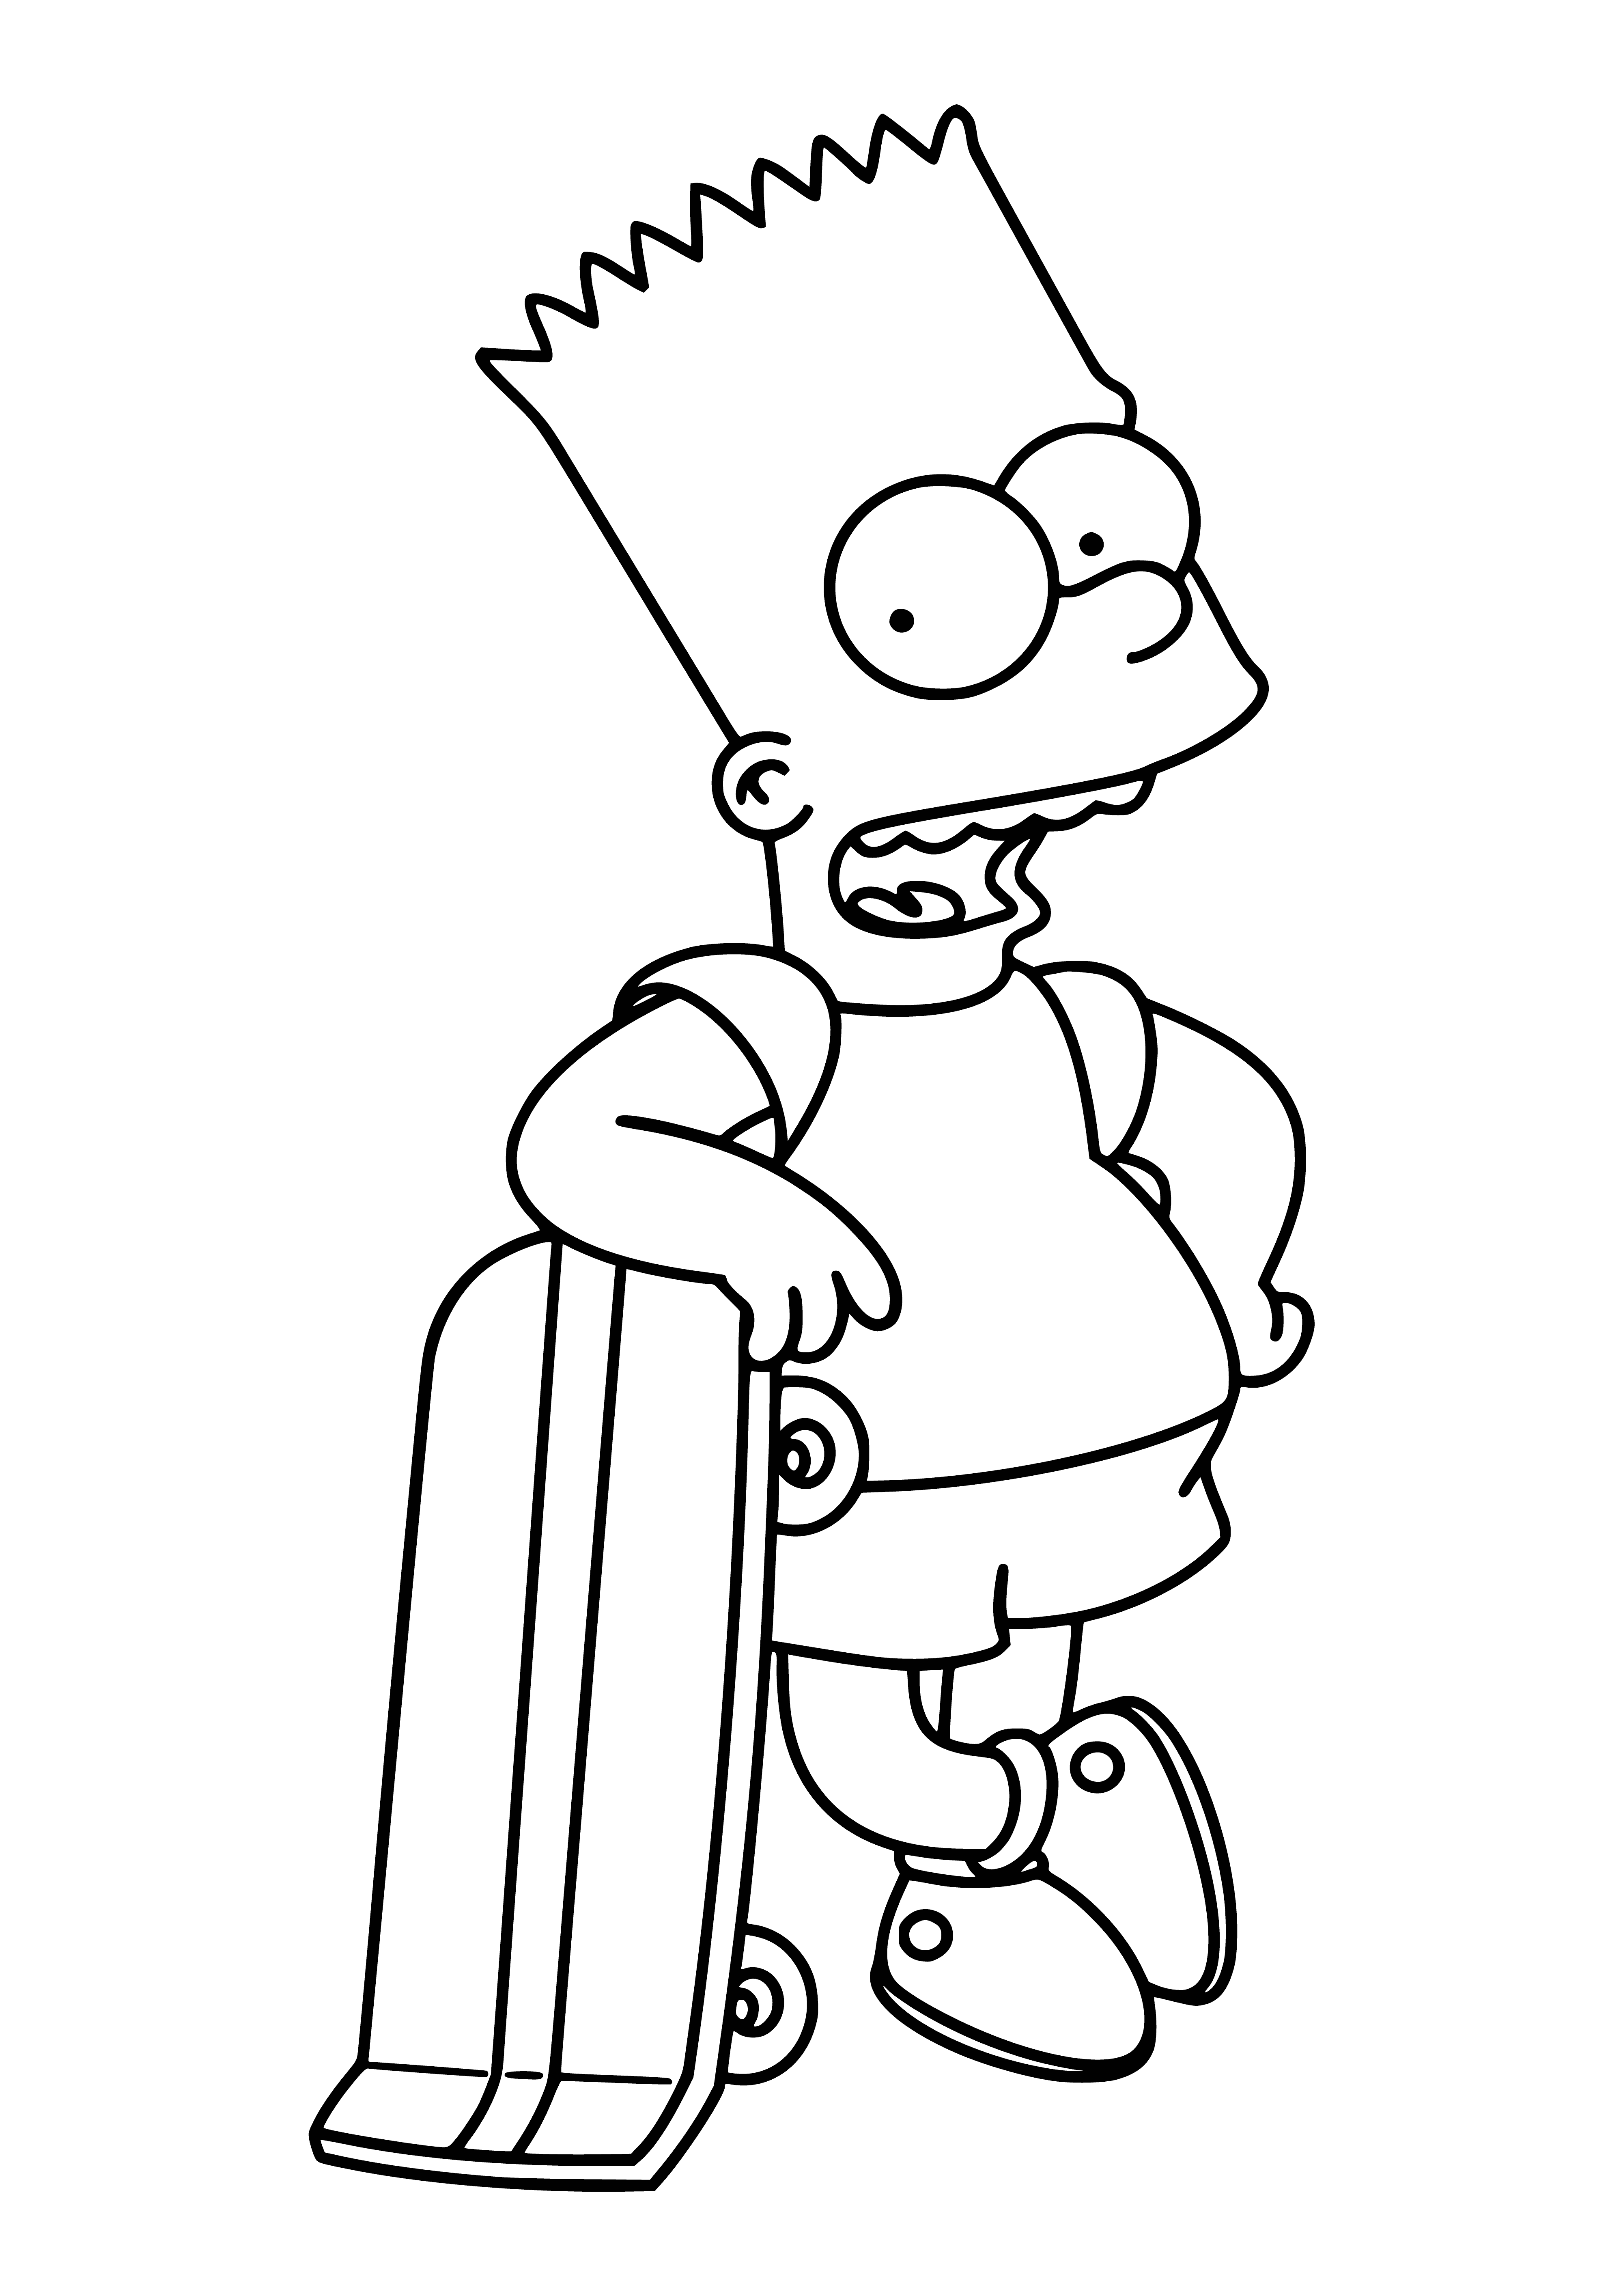 Bart Simpson coloring page